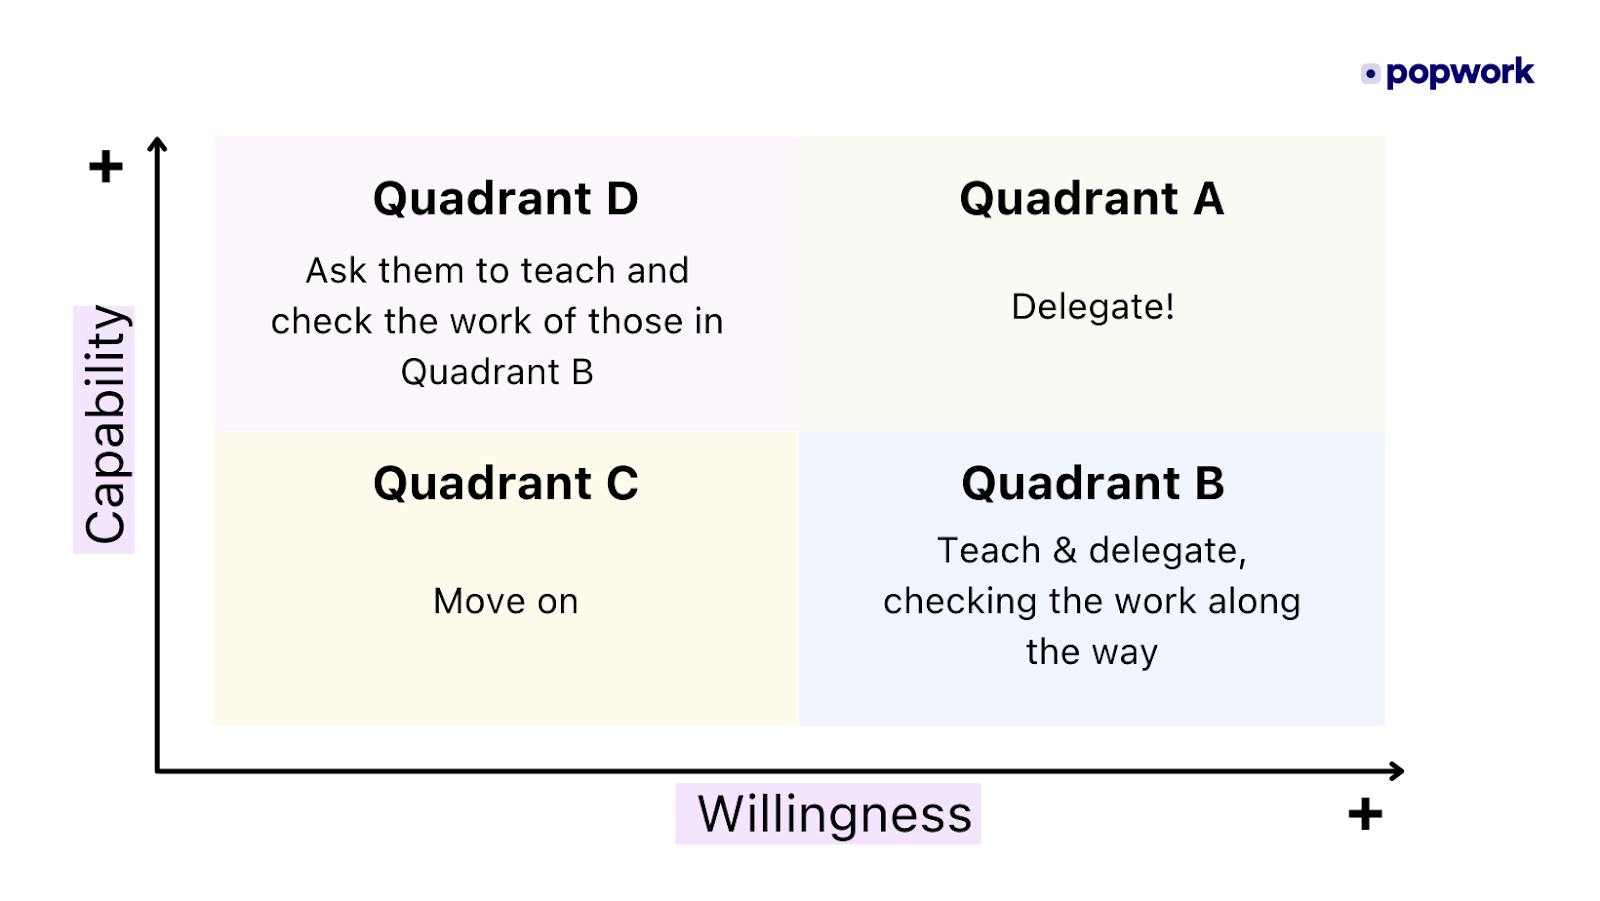 Decision support matrix to evaluate the employees to whom to delegate an assignment.